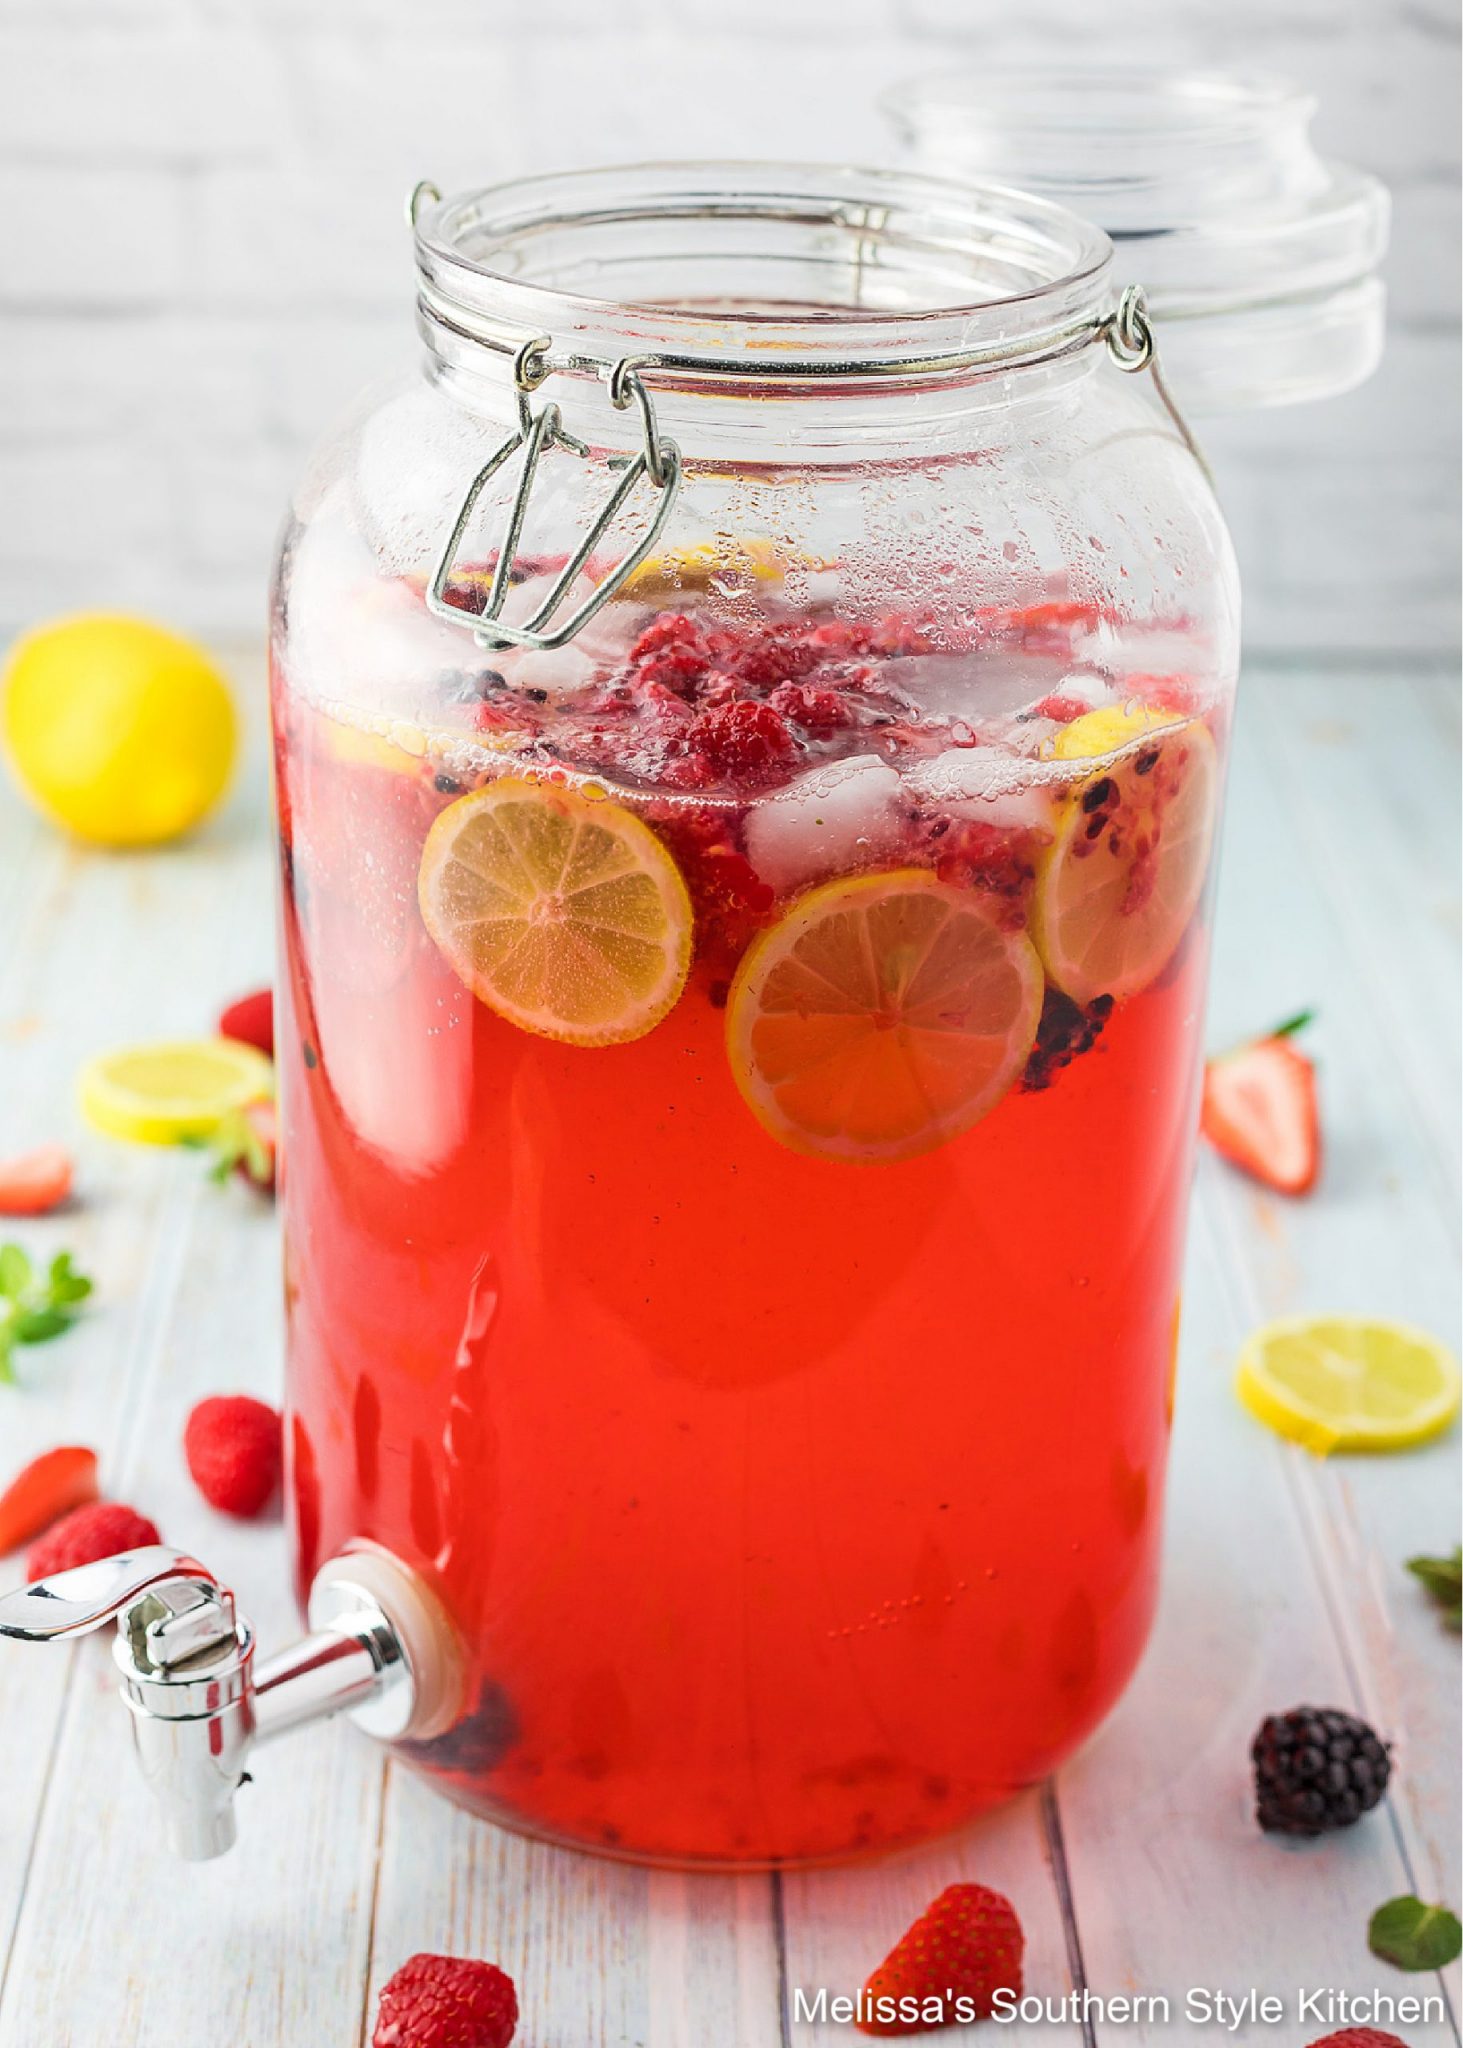 Sparkling Berry Lemonade made with strawberries